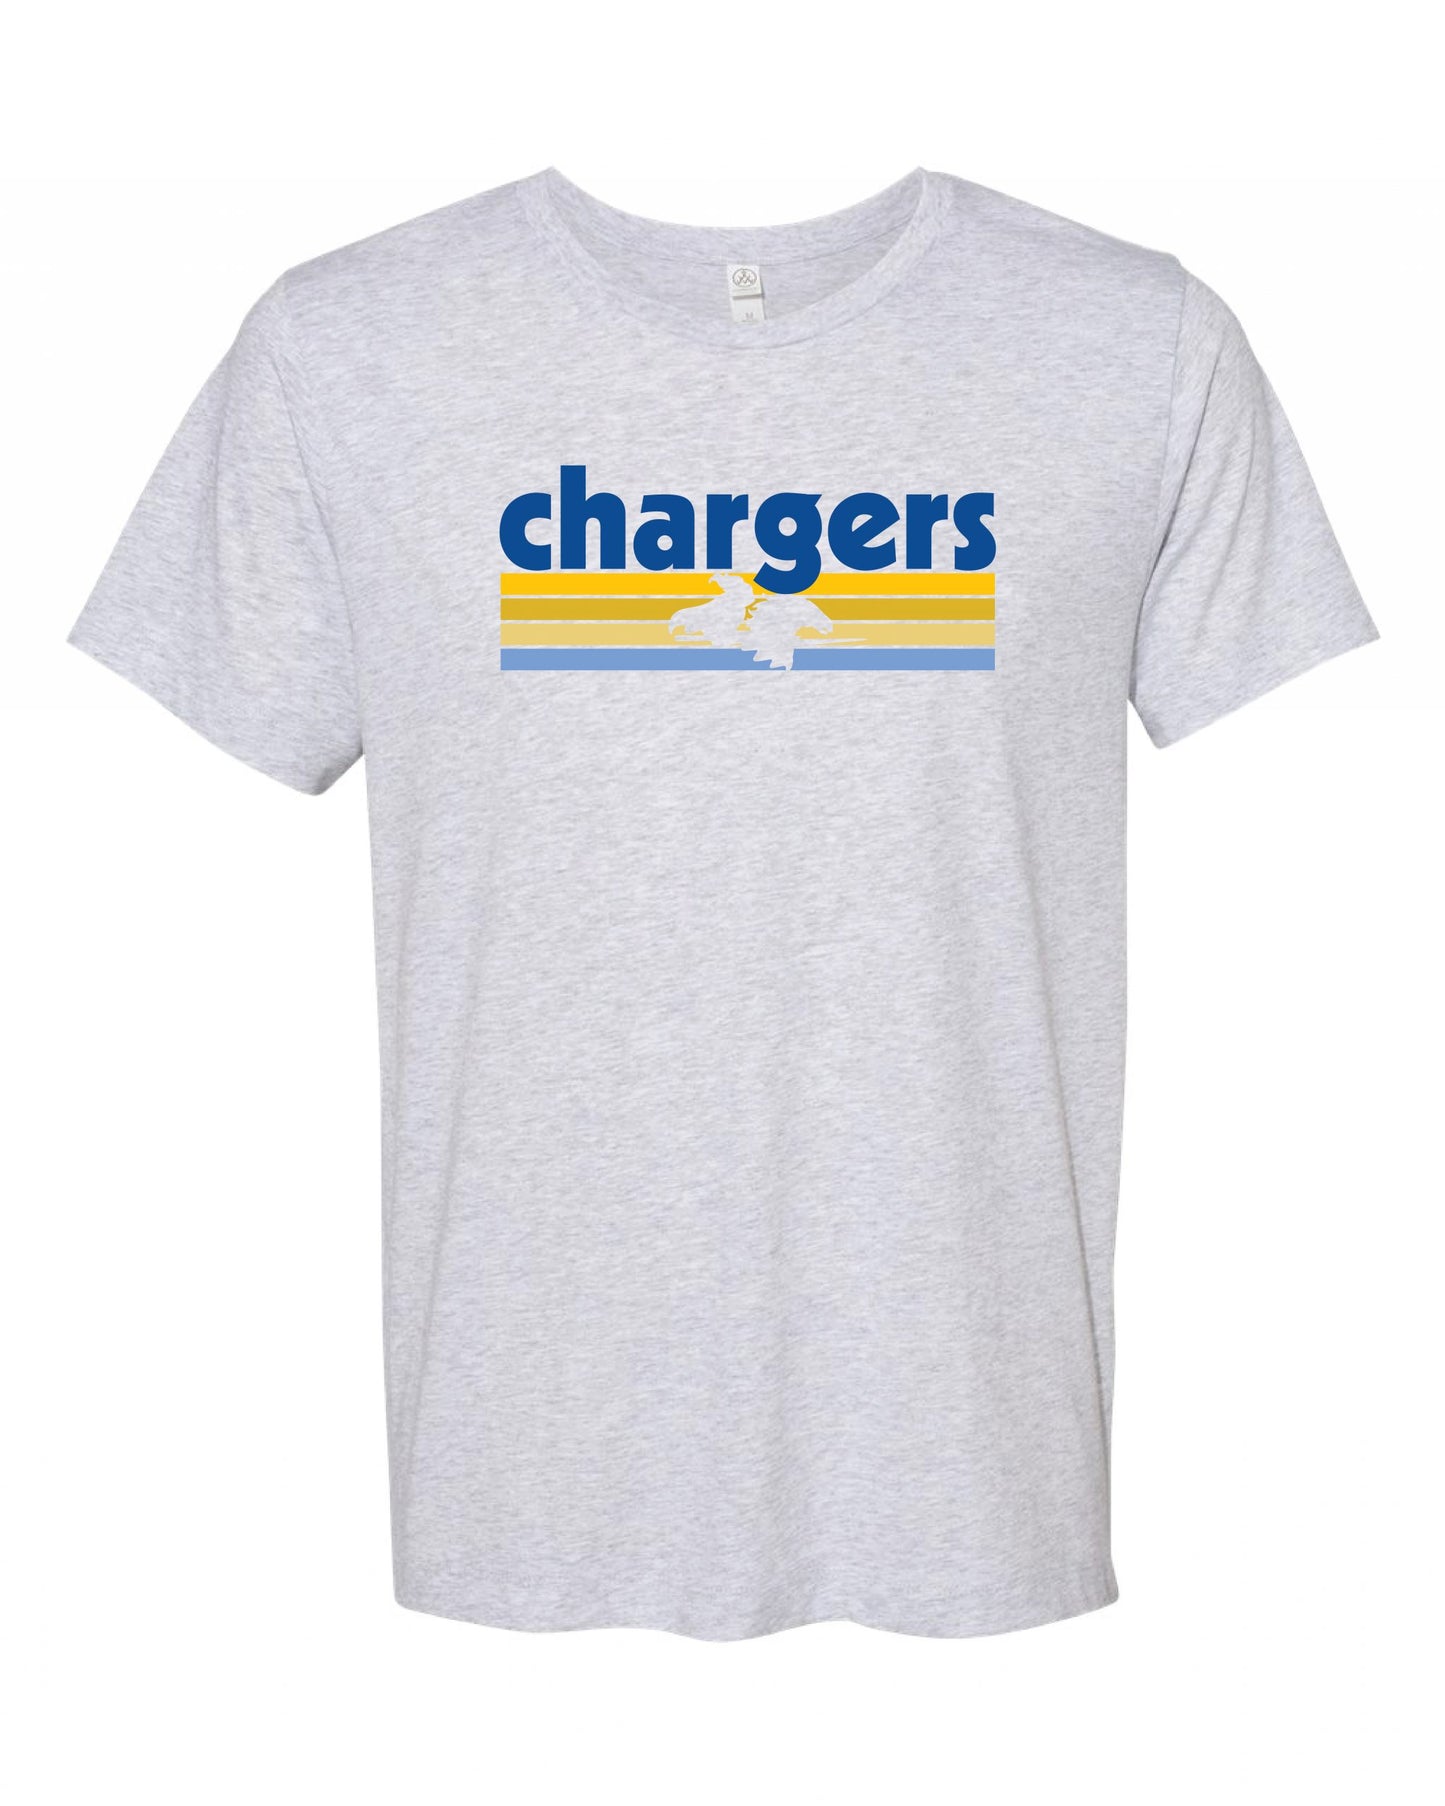 Chargers Retro Logo Knockout tee